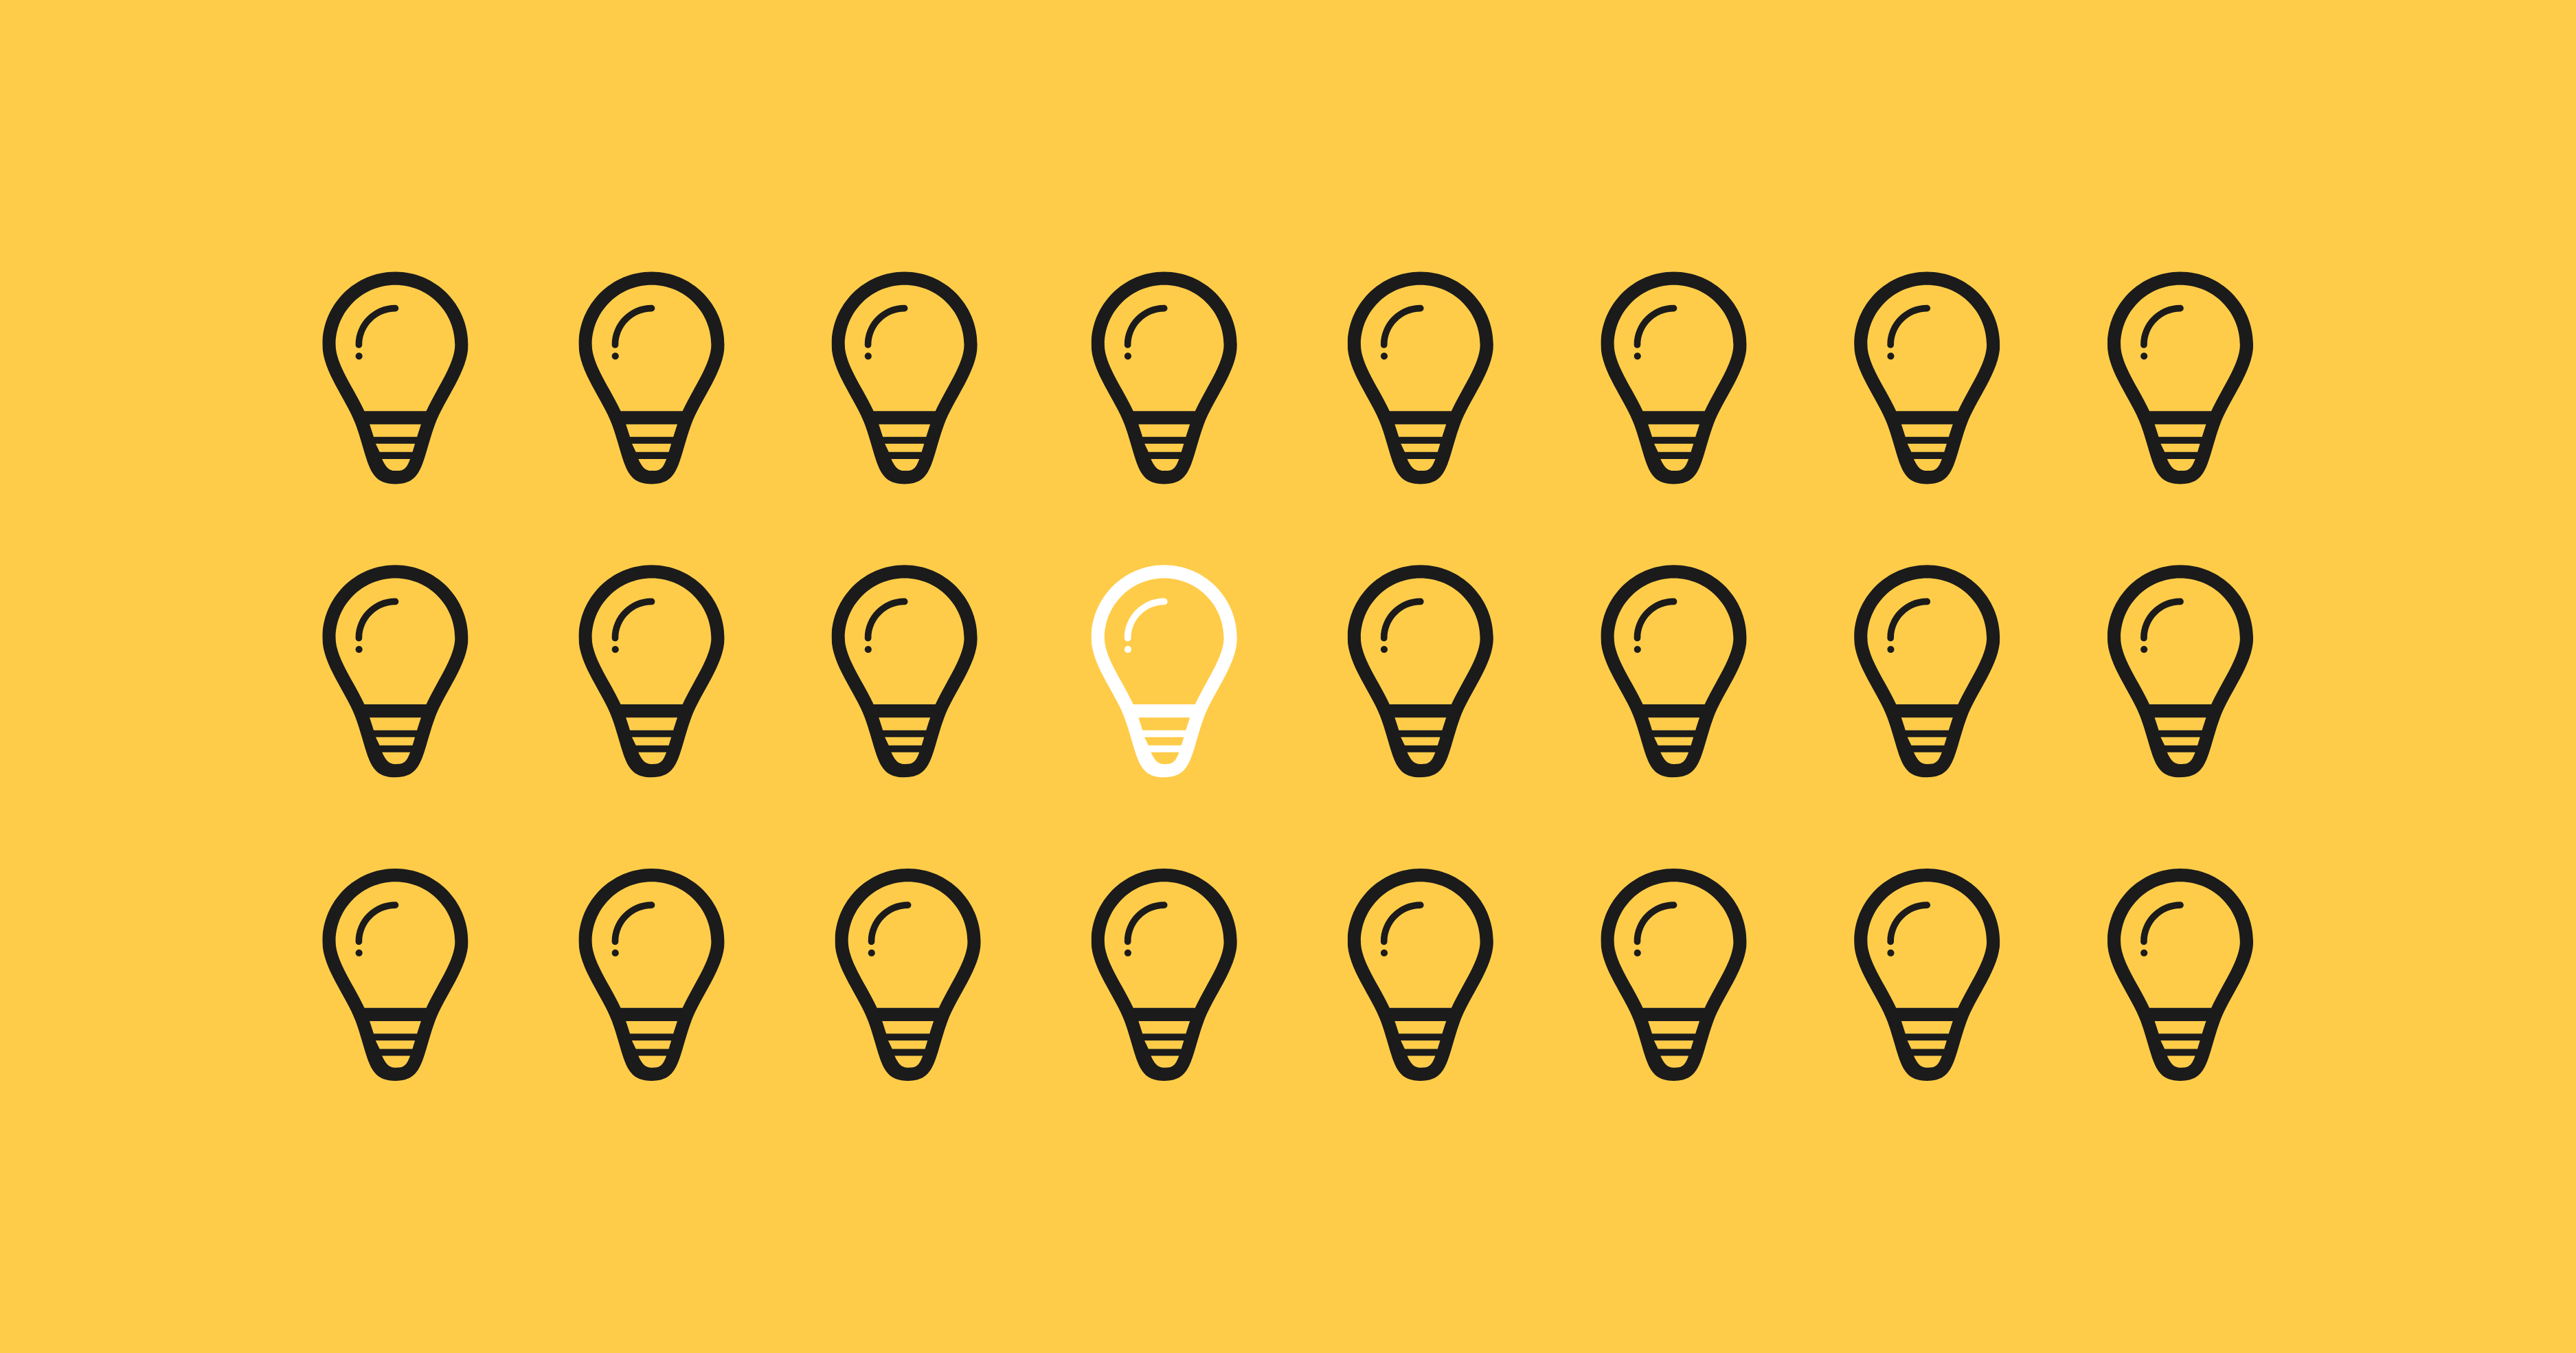 Three lines of black lightbulb graphic art on a yellow background. One lightbulb graphic in the centre is white to illustrate a big idea amongst many ideas.